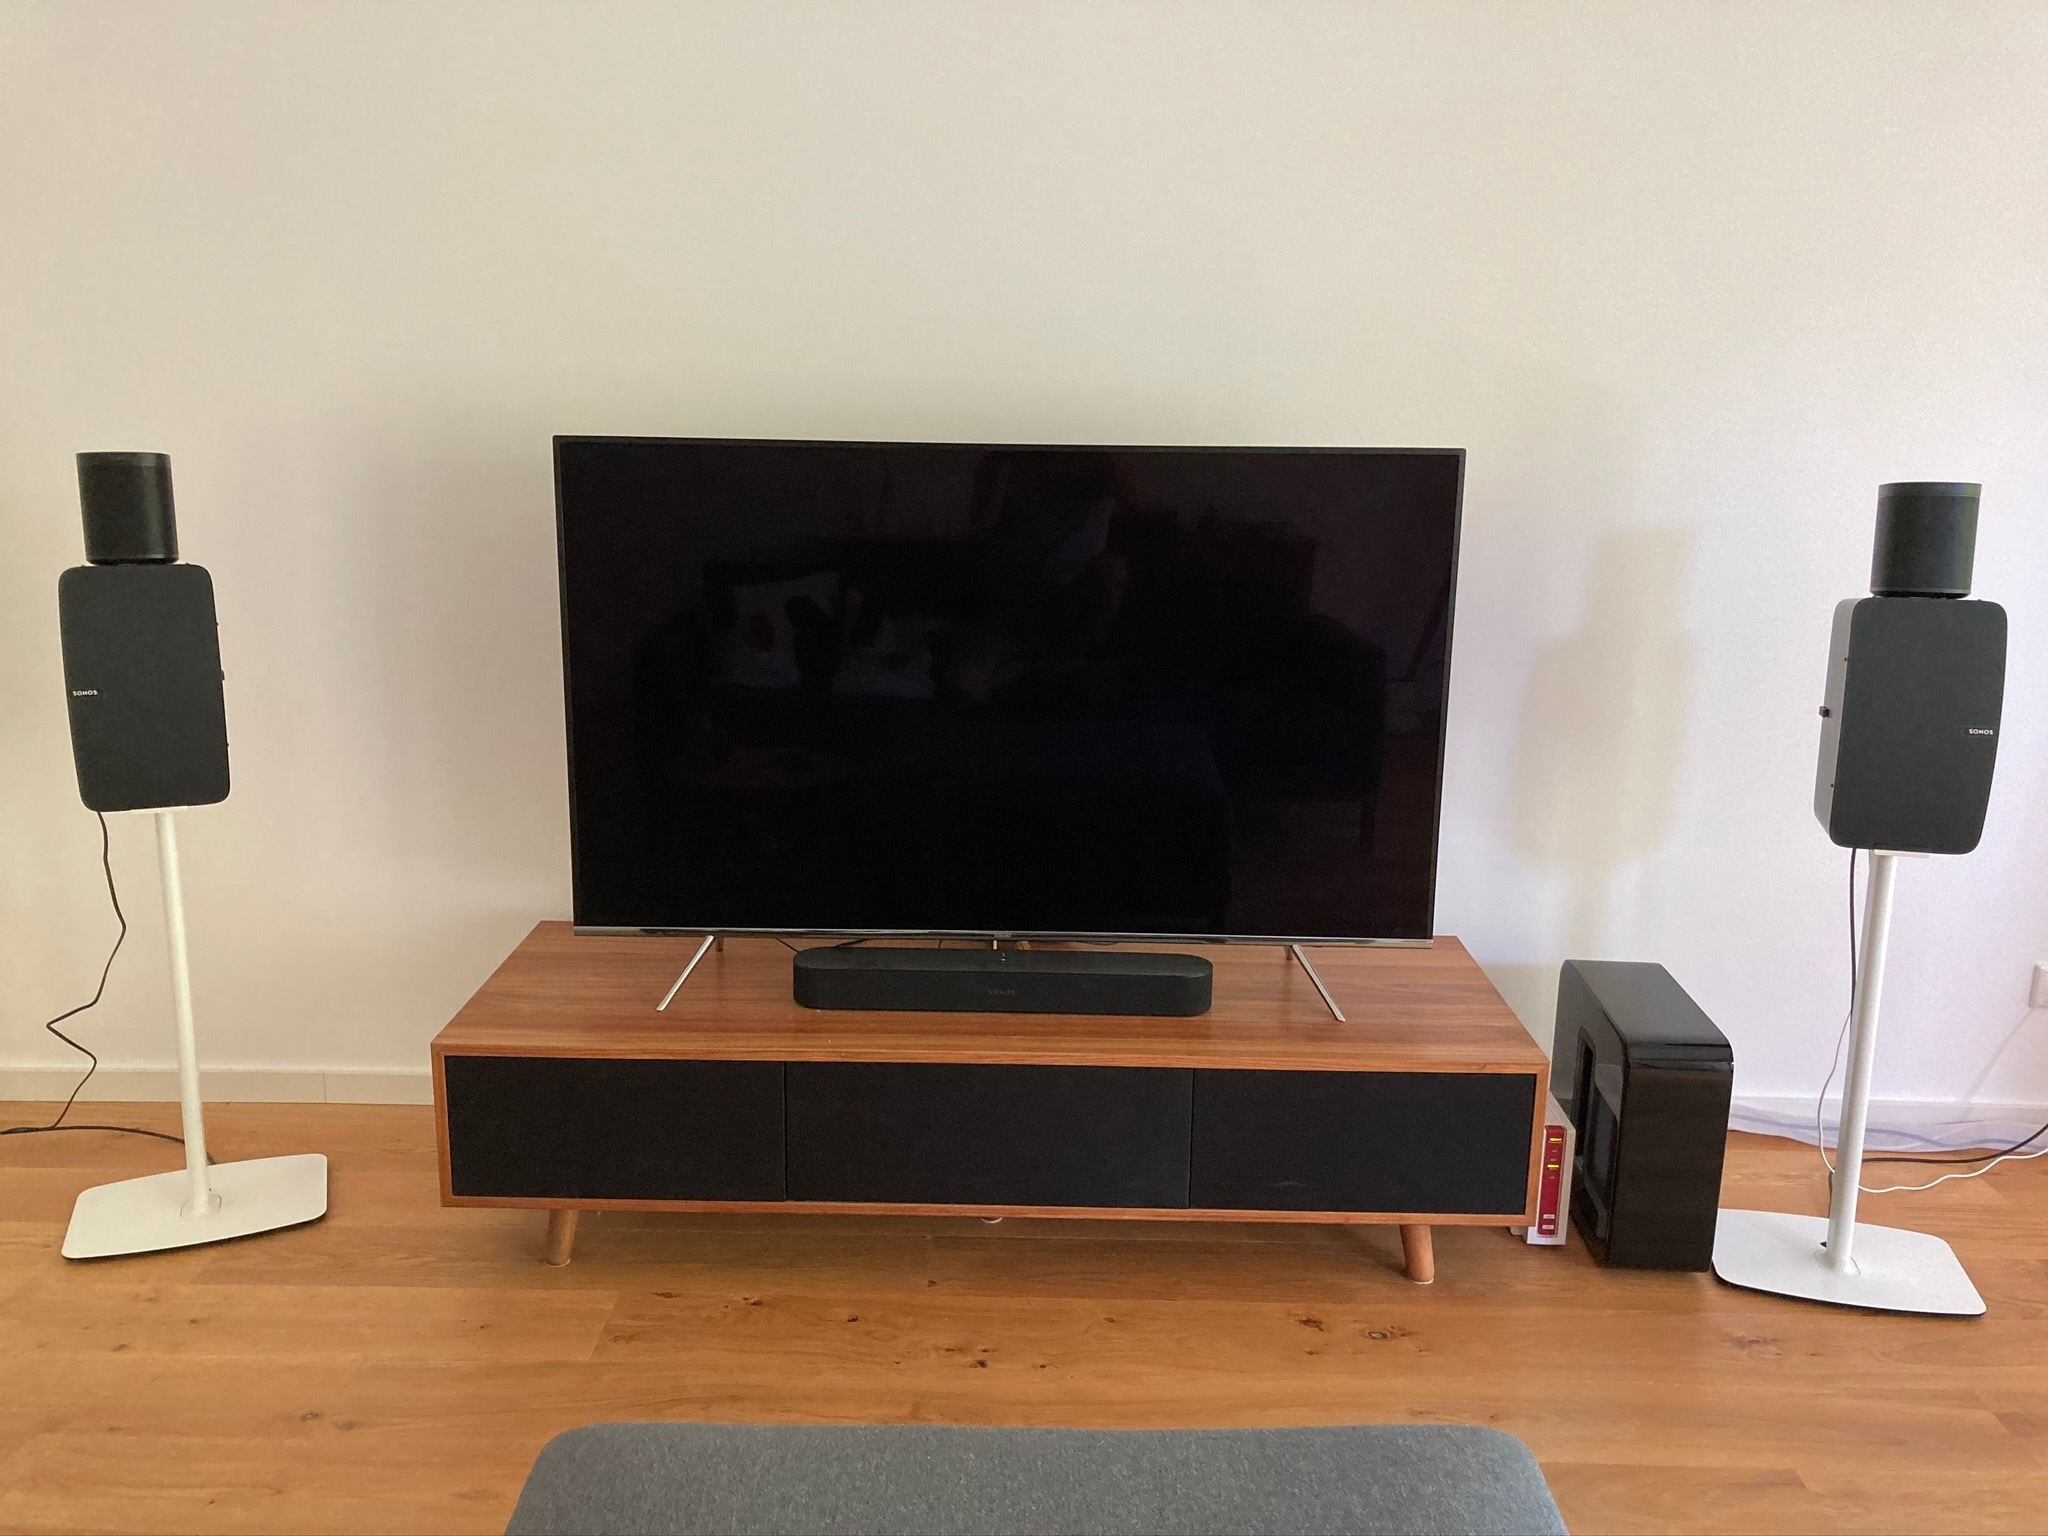 Triumferende Scan sav Sub with stereo pair of Ones much different to Sub with stereo pair of  Fives (Play 5s)? | Sonos Community